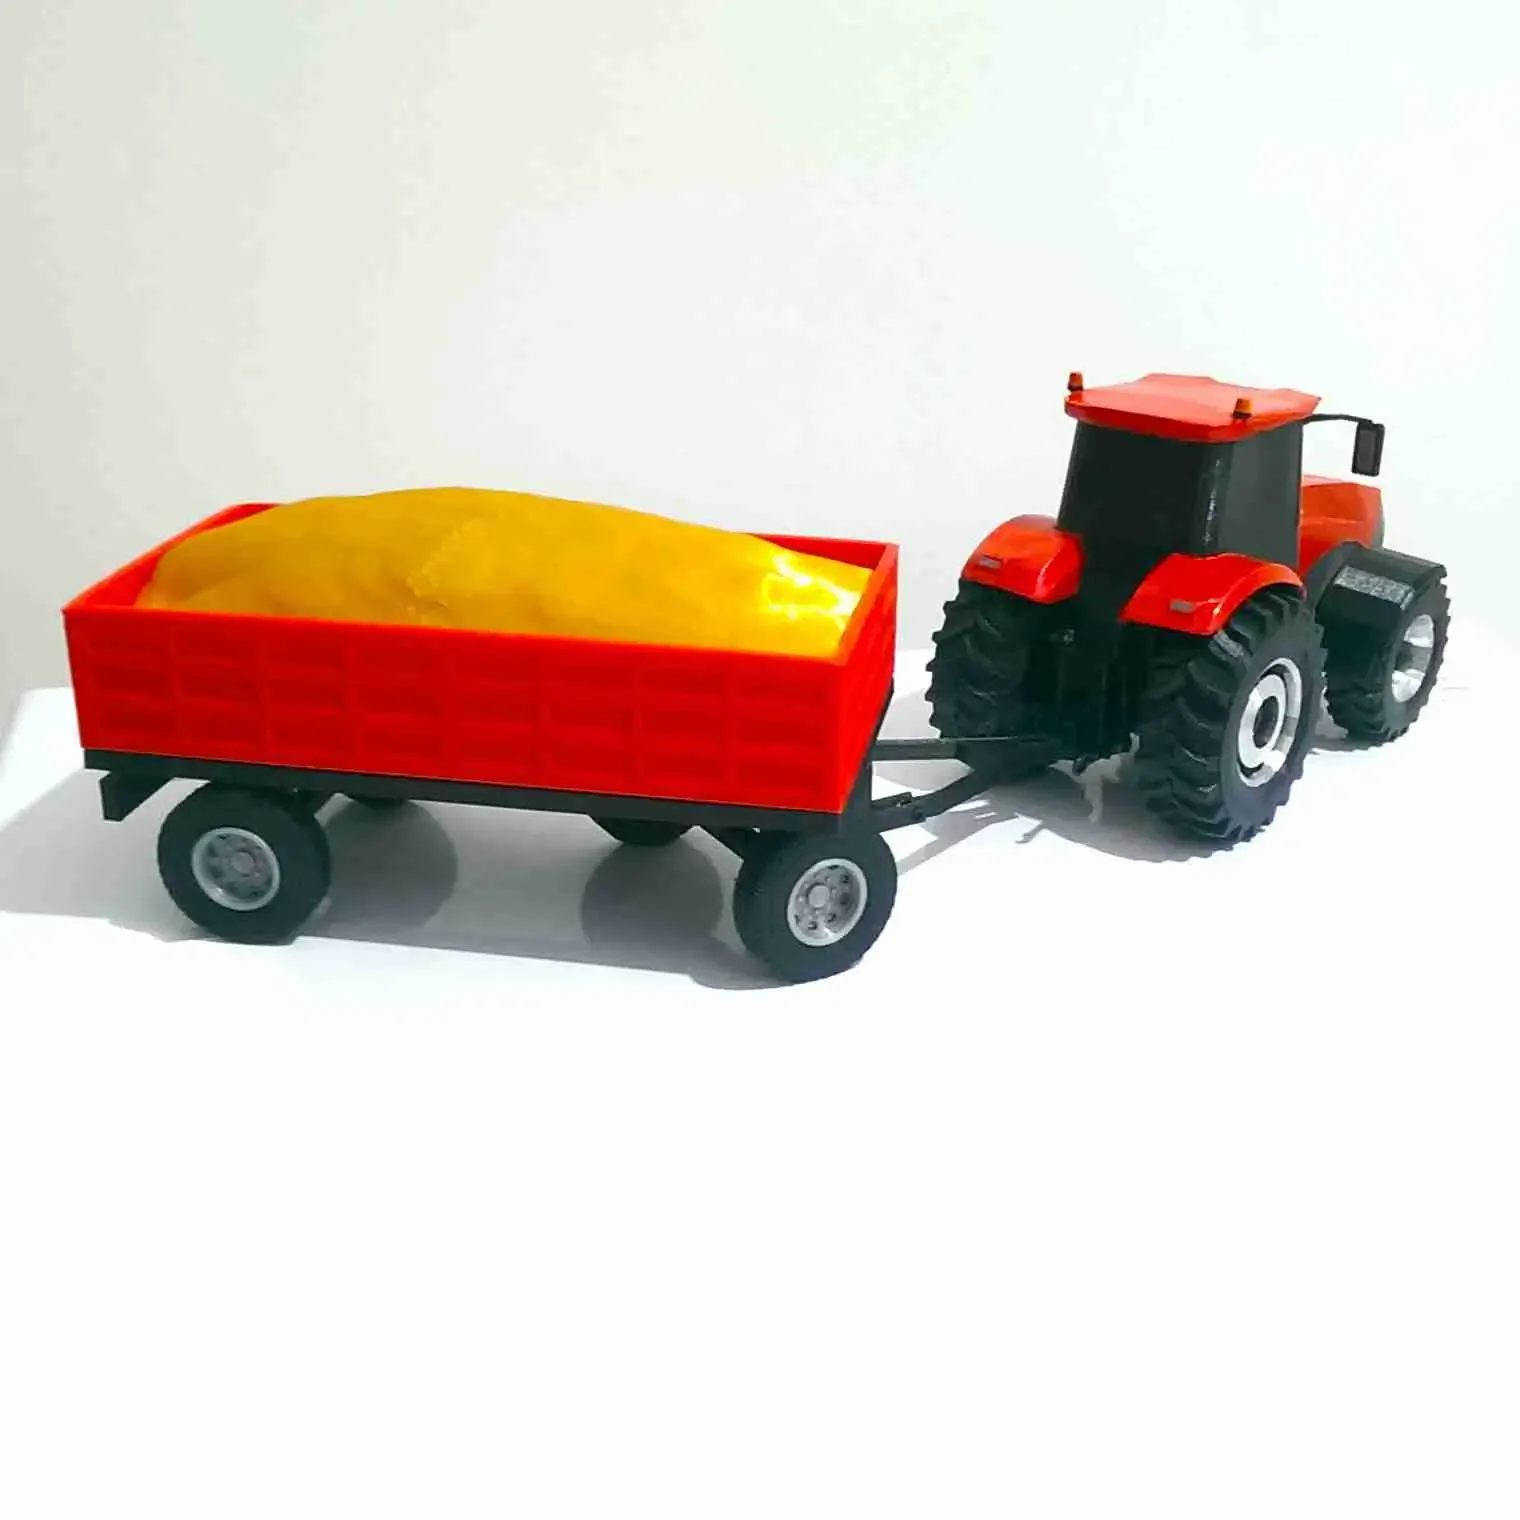 TRACTOR AND TRAILER